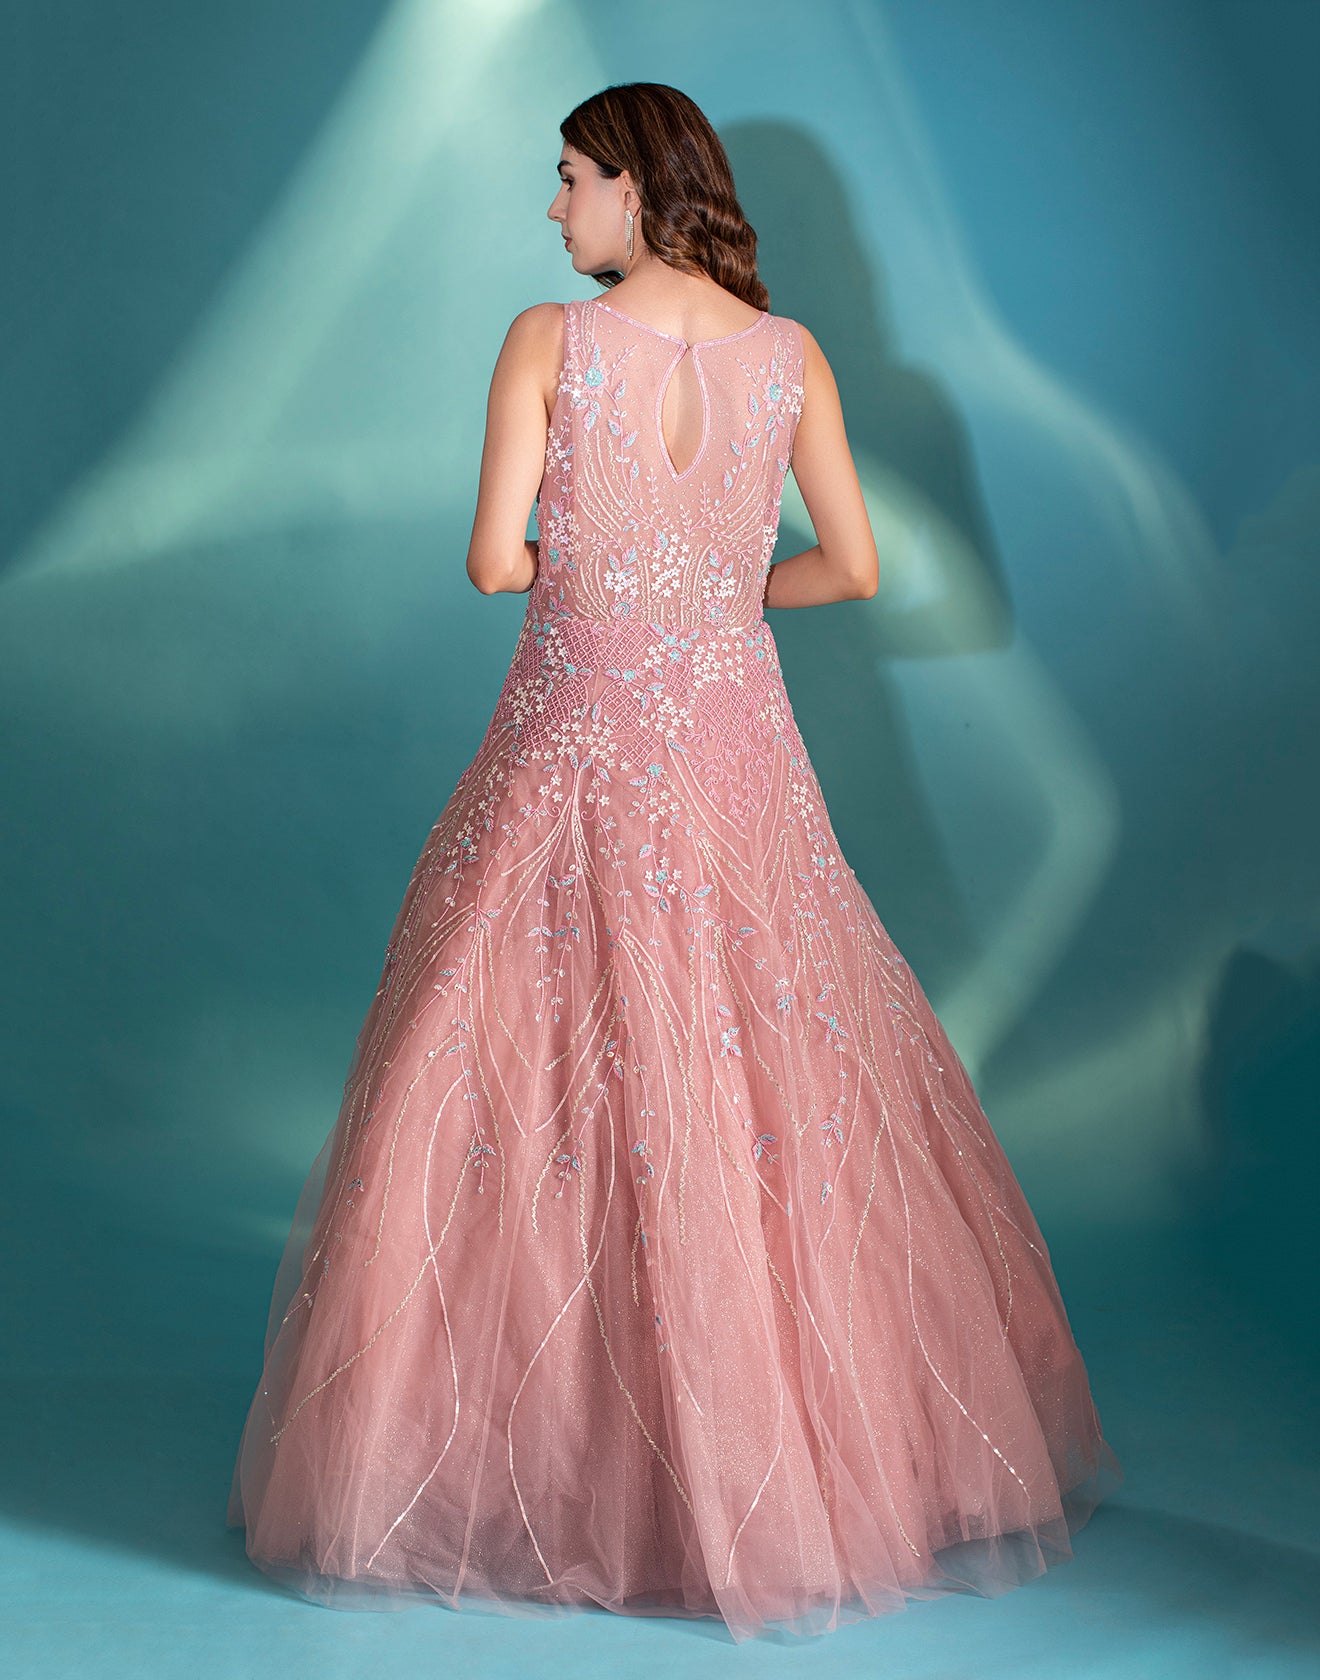 Pastel Pink Cocktail Gown